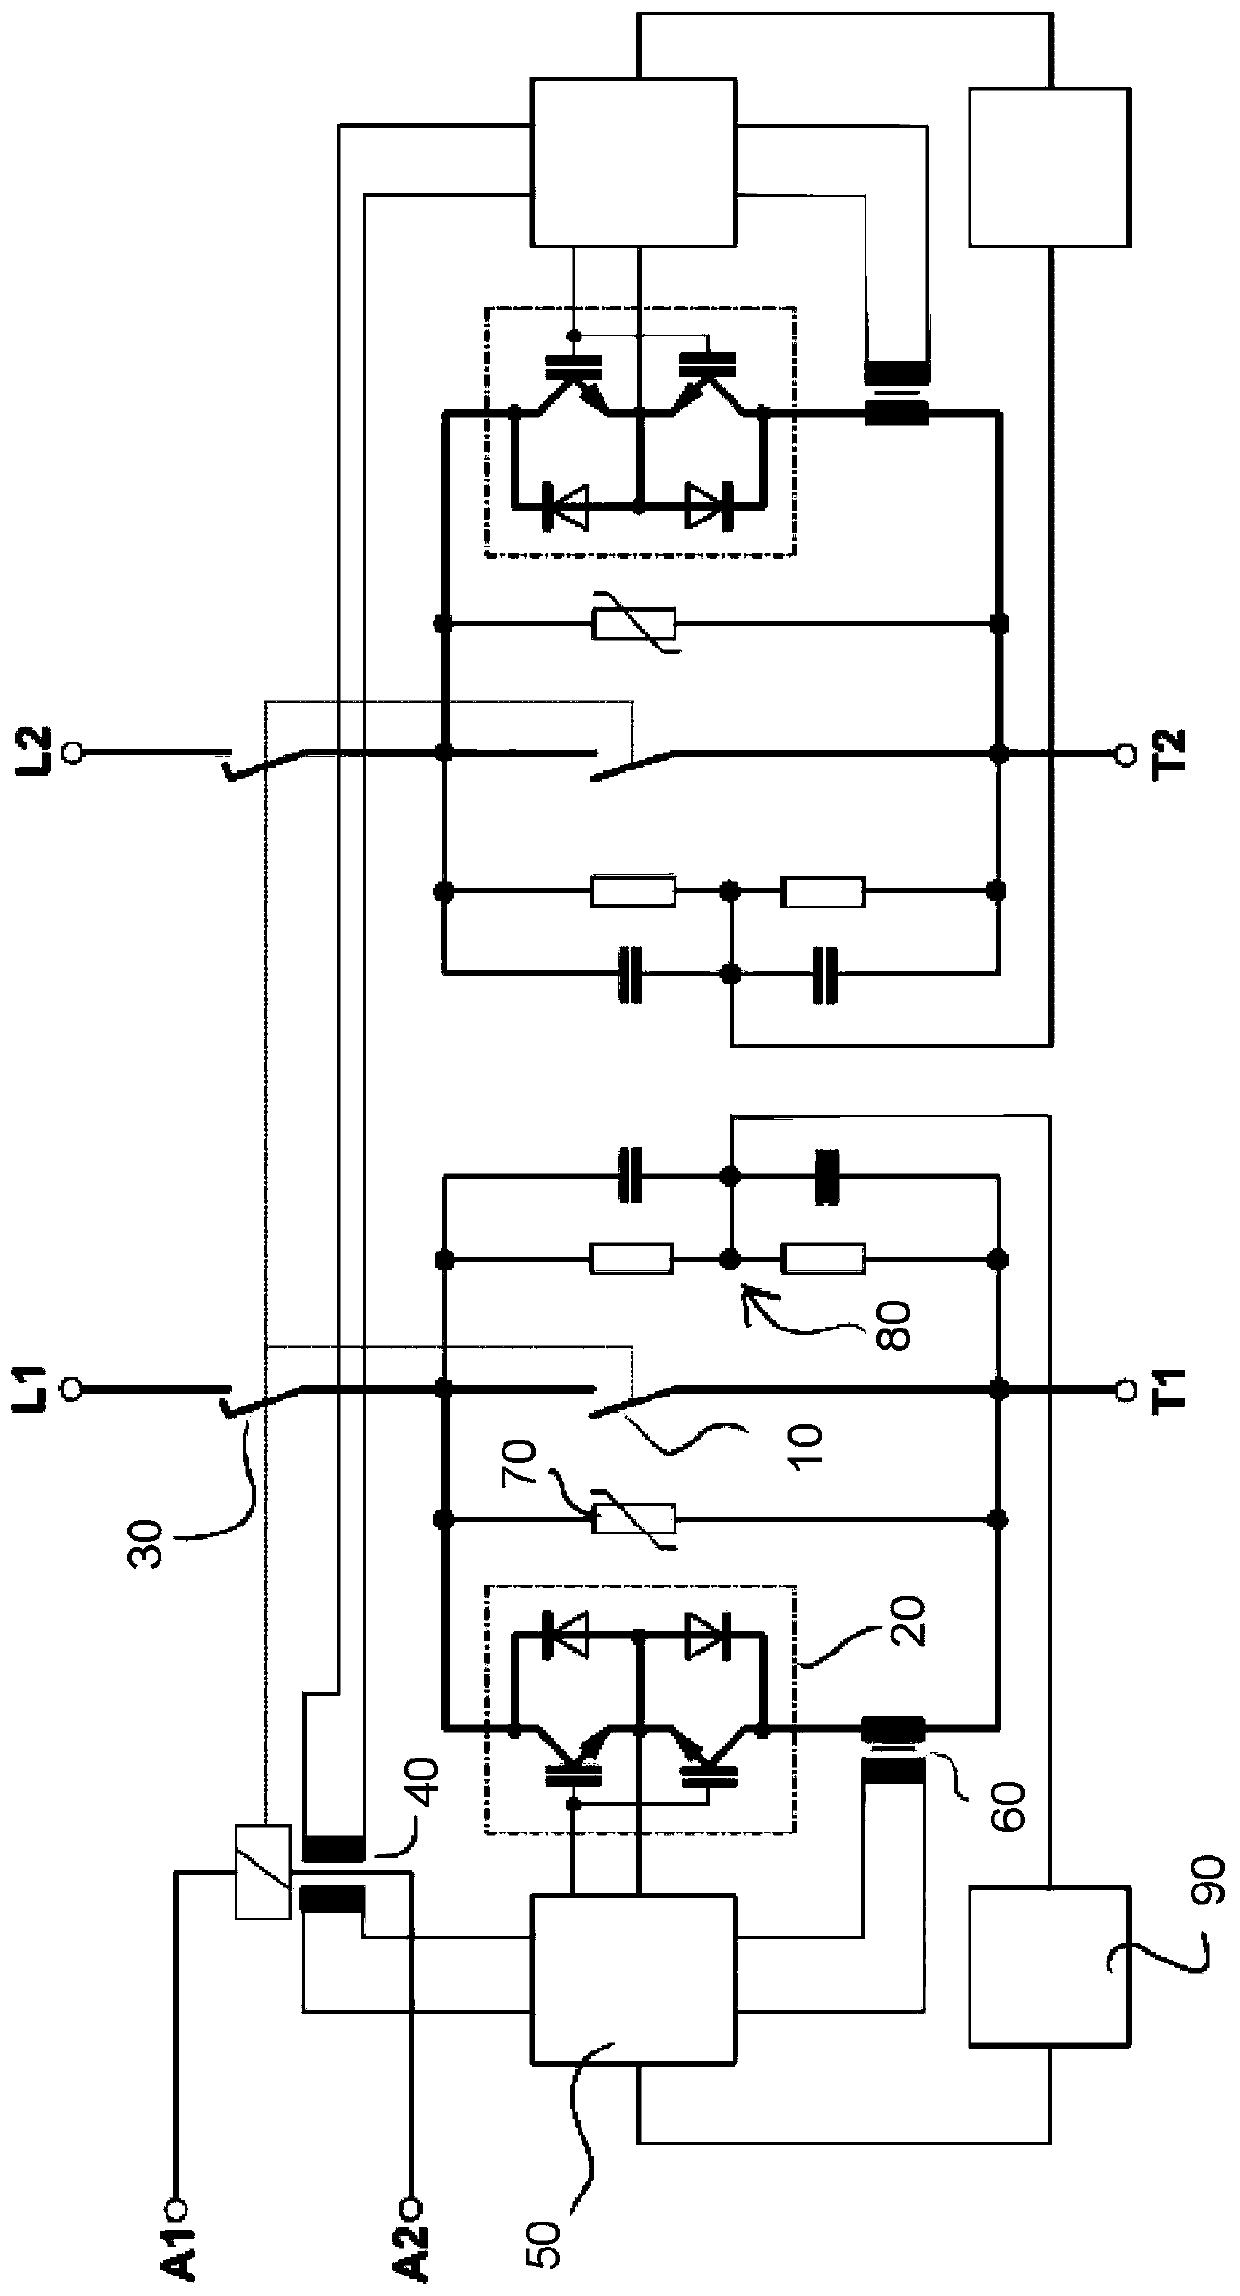 Switching apparatus for carrying and disconnecting electric currents, and switchgear having a switching apparatus of this kind